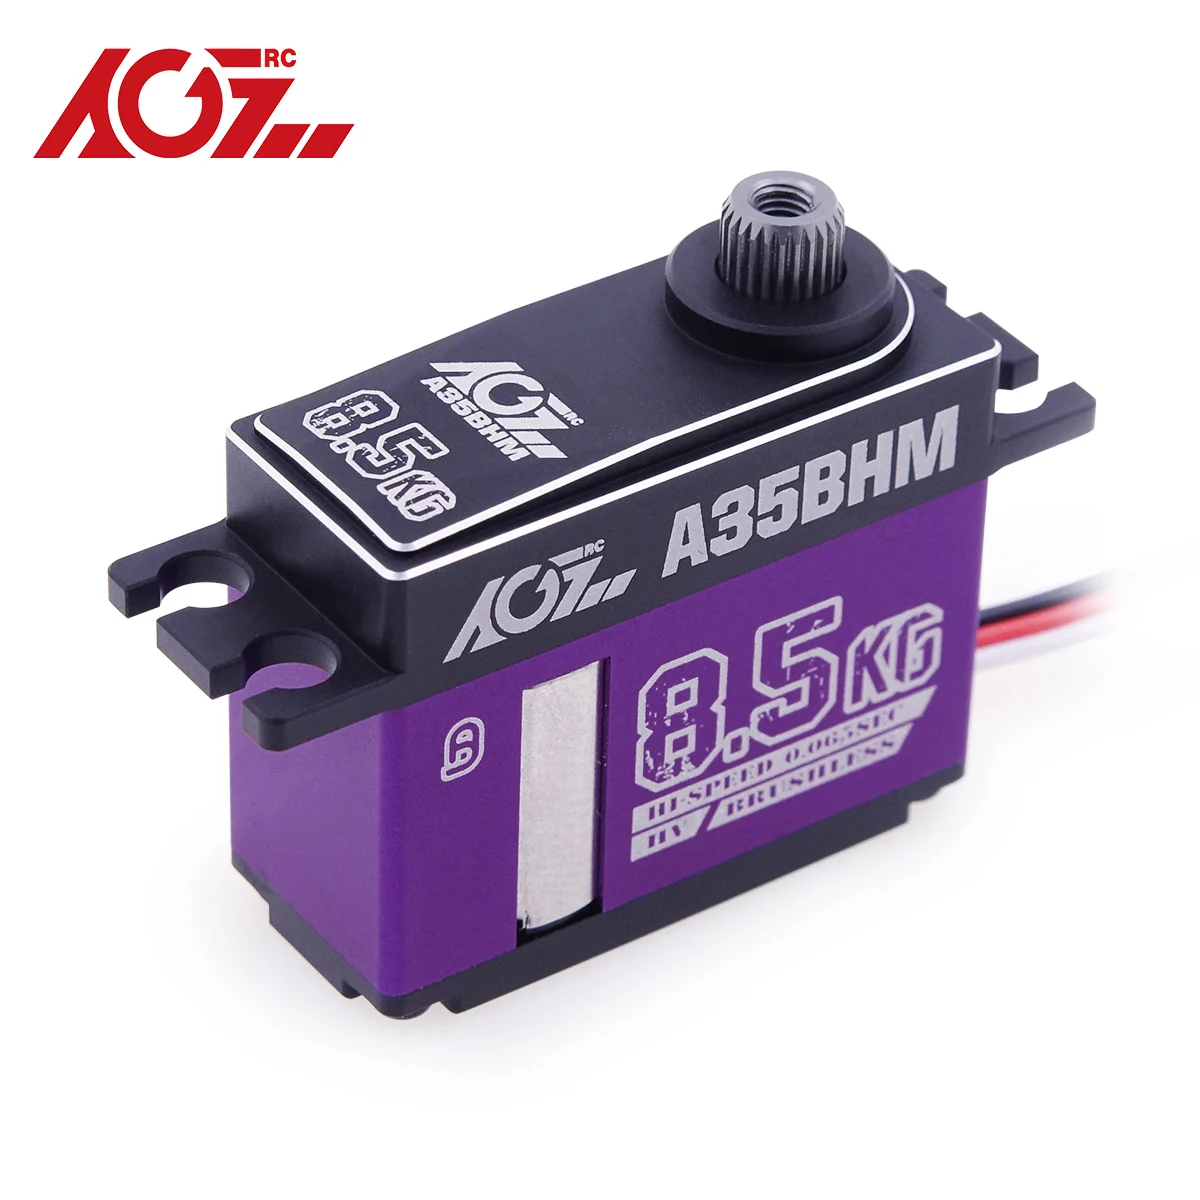 

AGFRC A35BHM Metal Case High Speed 0.065sec 8.5KG HV Programmable Titanium Gear Mid Size Brushless Servo For Small Aircraft Jet